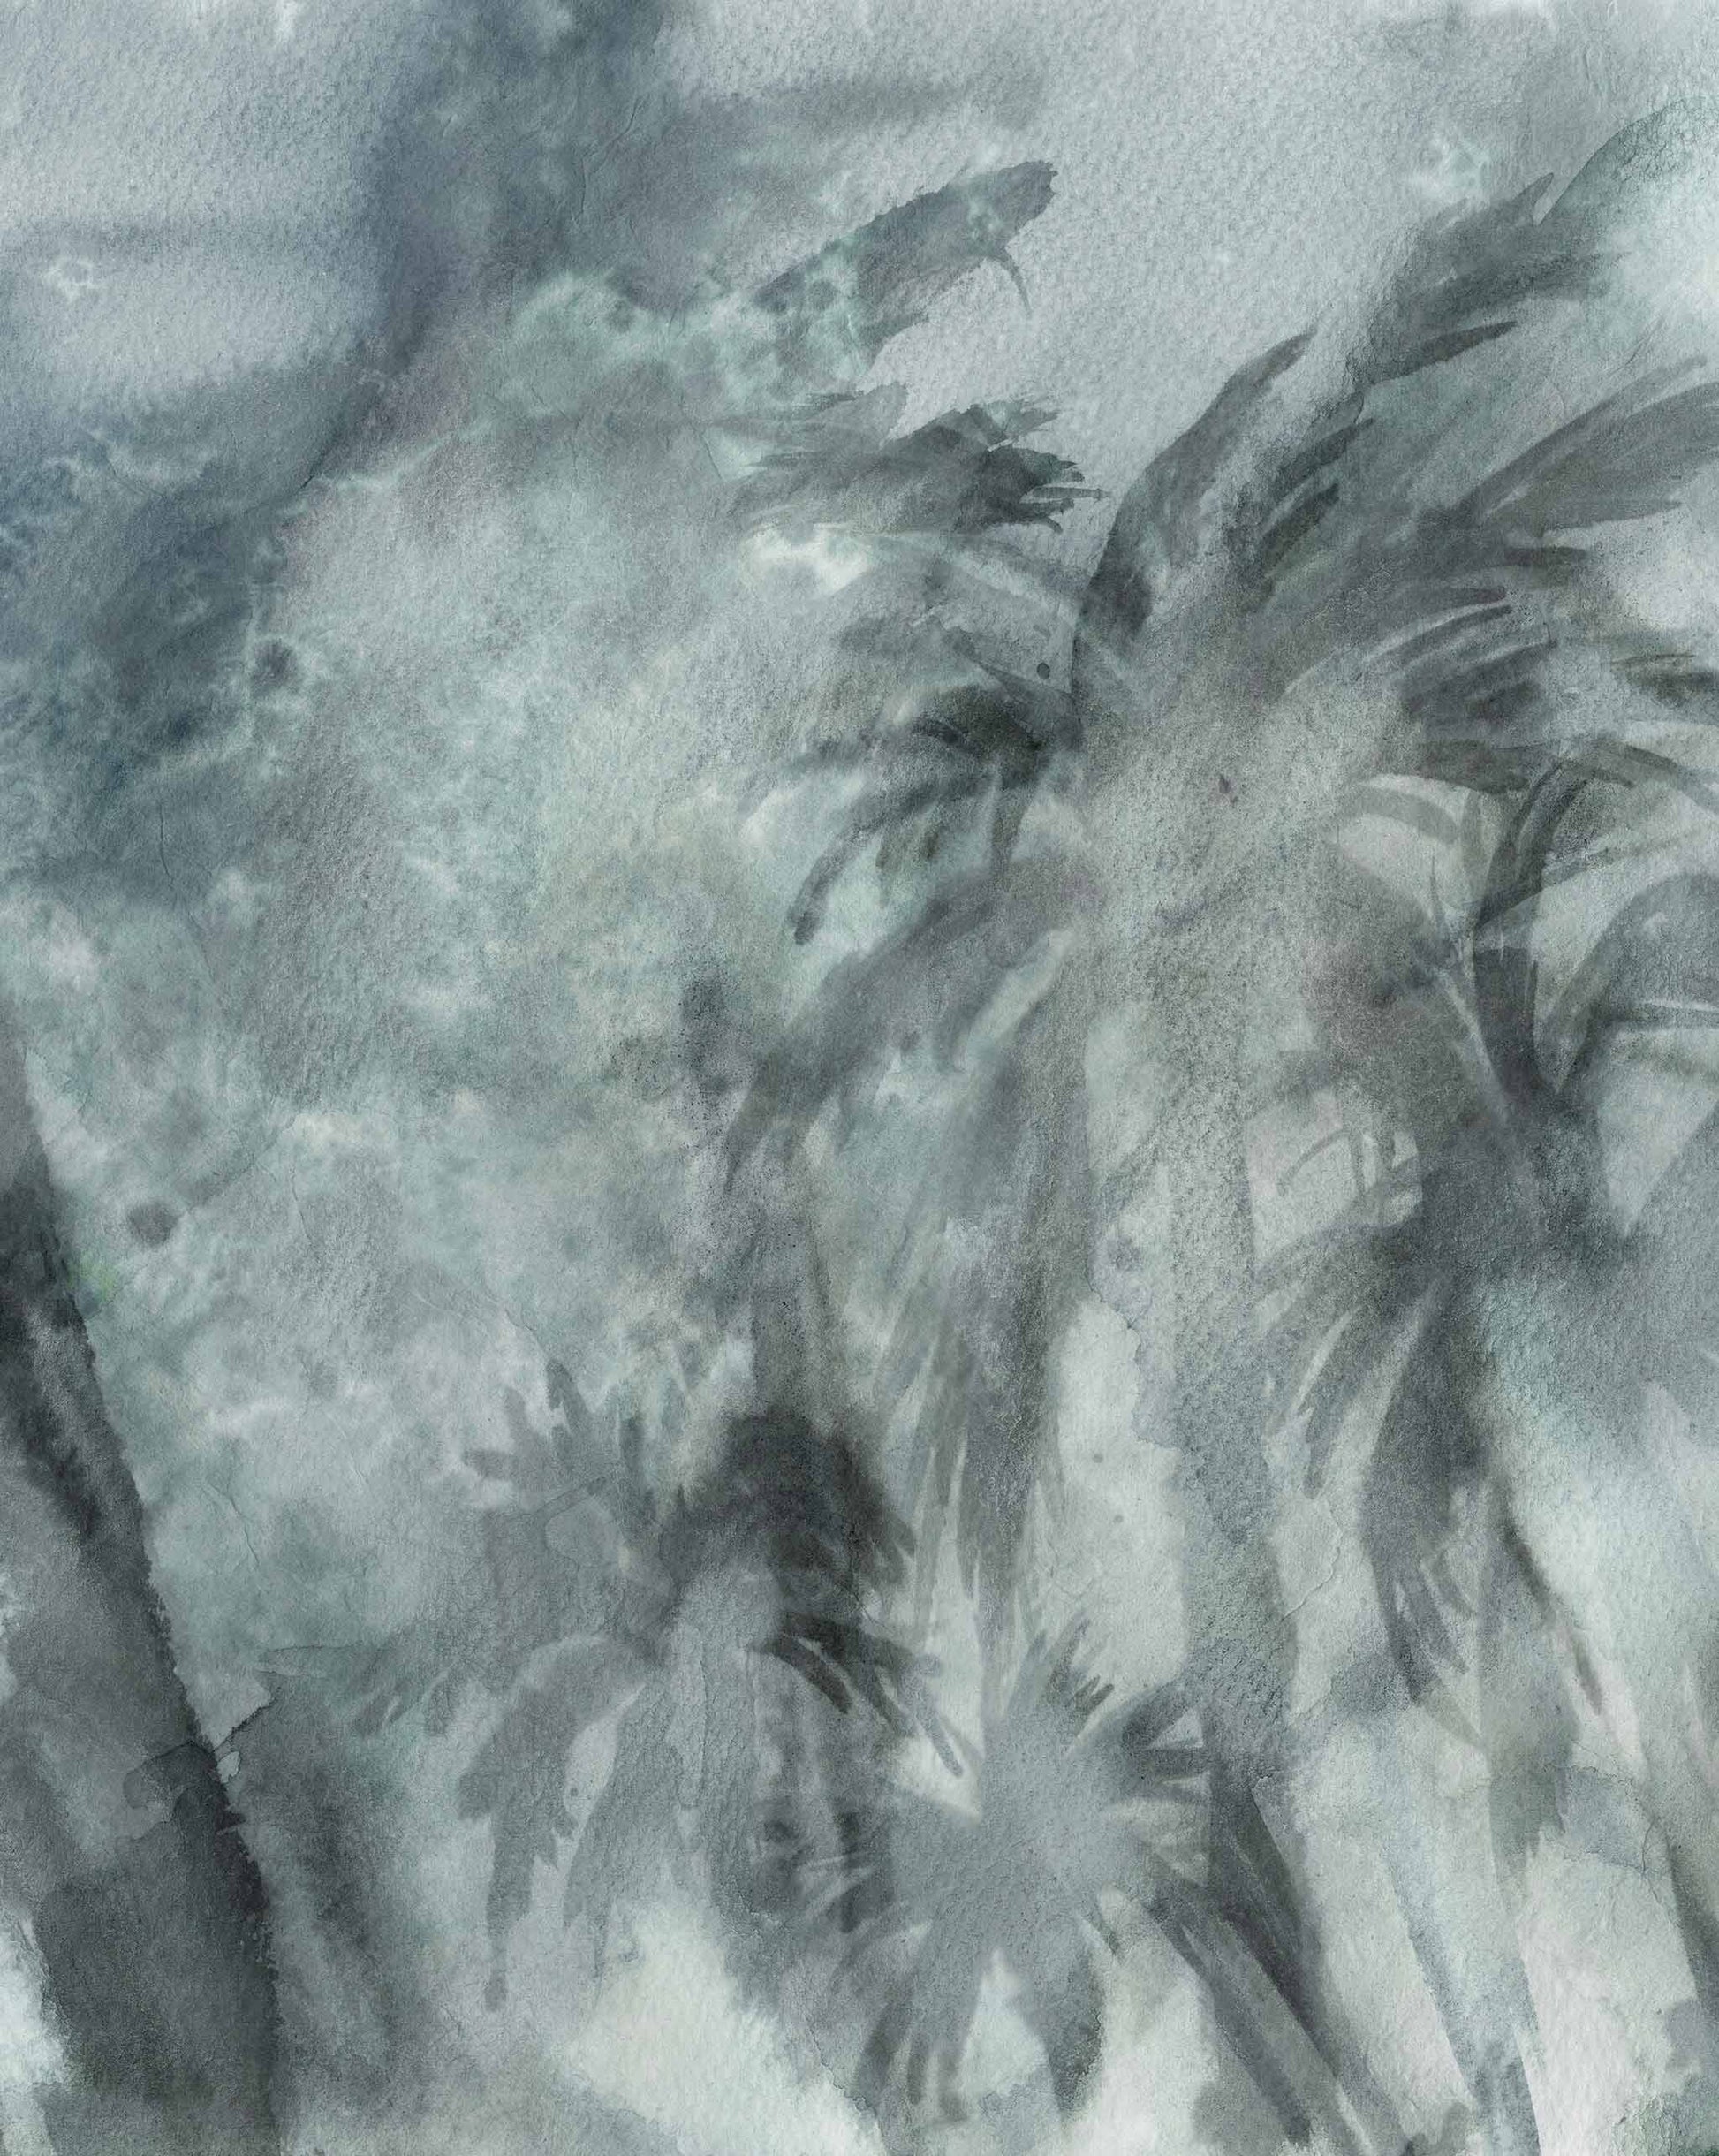 Abstract watercolor Reflettere Wallpaper Mural||Notte of a stormy scene with dark, blurred palm trees in shades of gray.